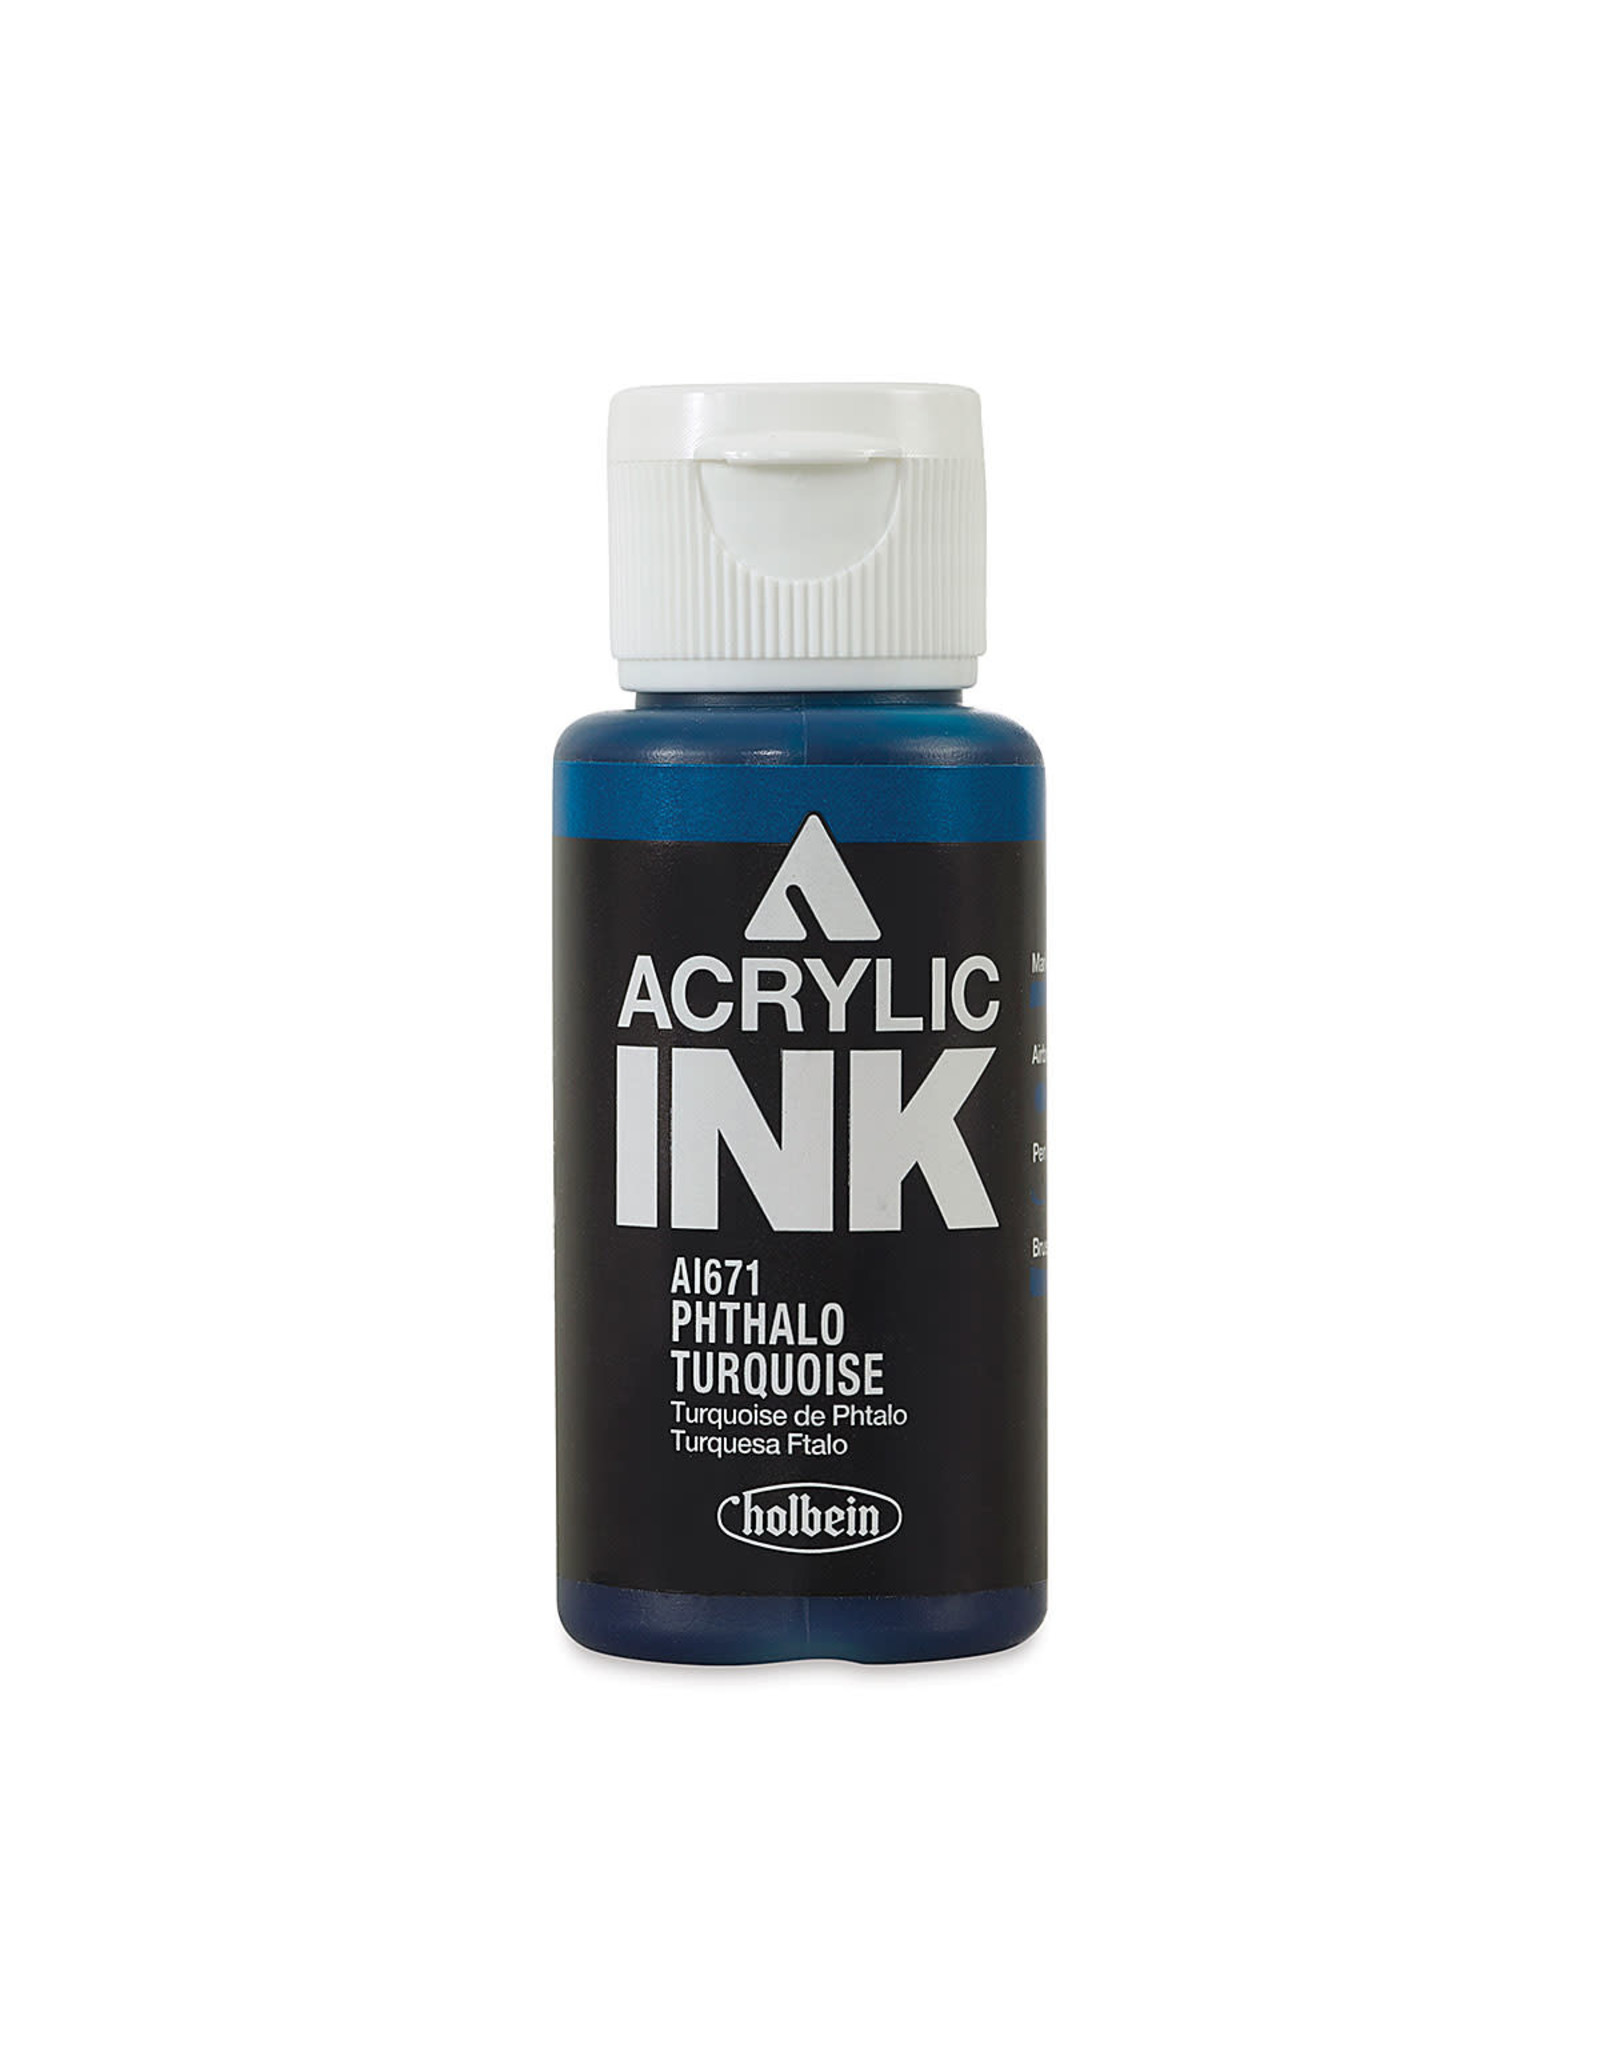 CLEARANCE Holbein Acrylic Ink, Phthalo Turquoise, 30ml